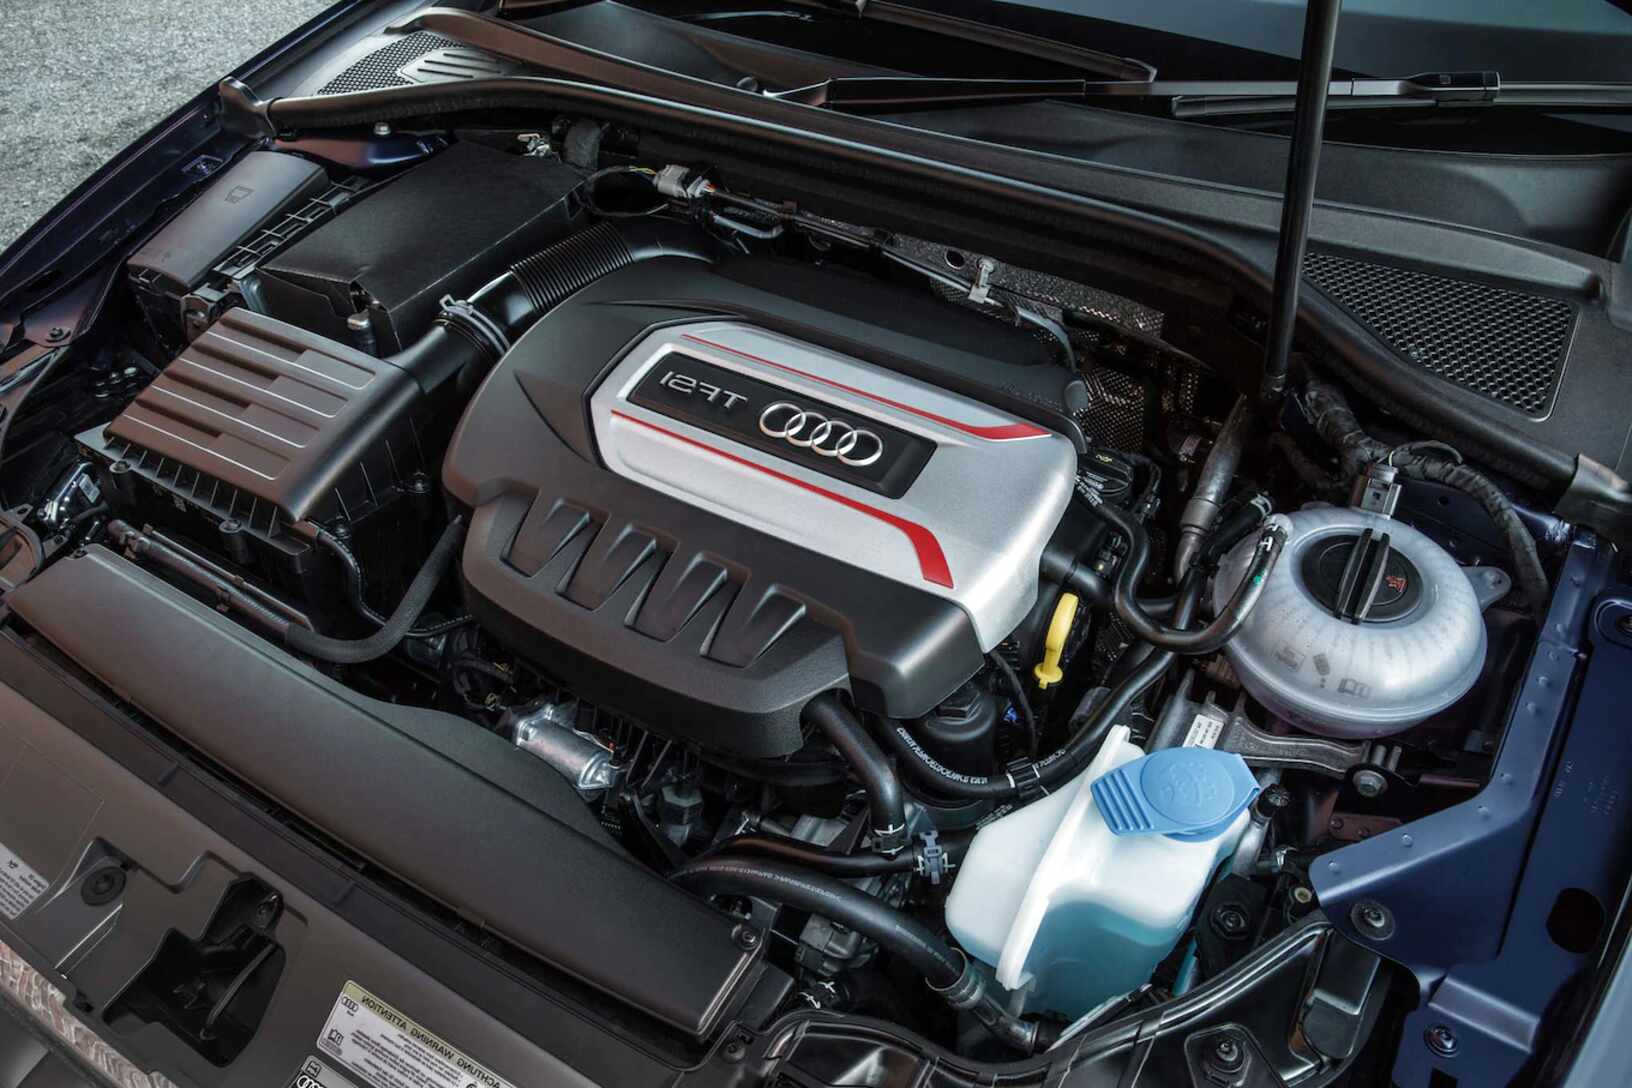 Audi S3 Engine for sale in UK | 71 used Audi S3 Engines